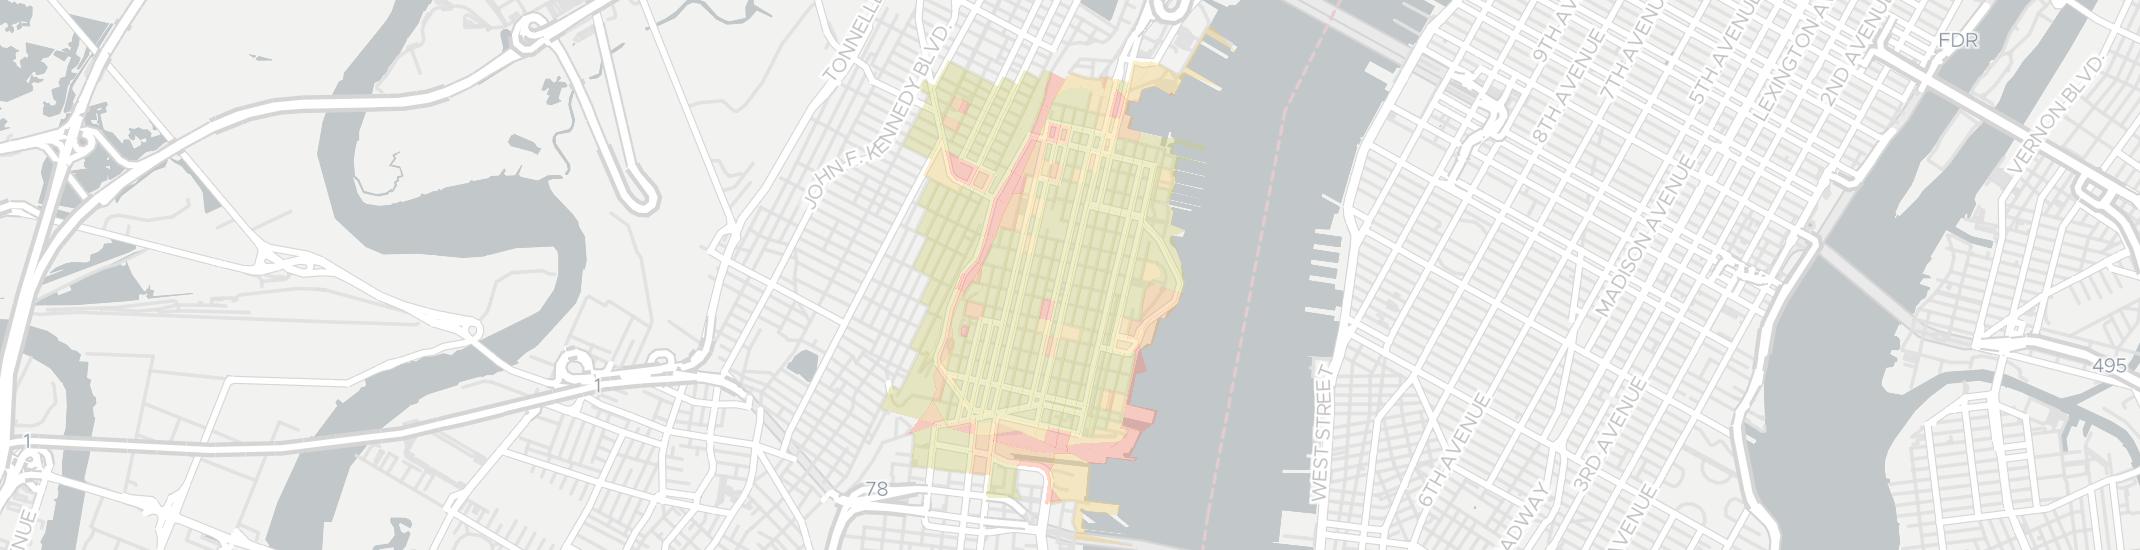 Hoboken Internet Competition Map. Click for interactive map.